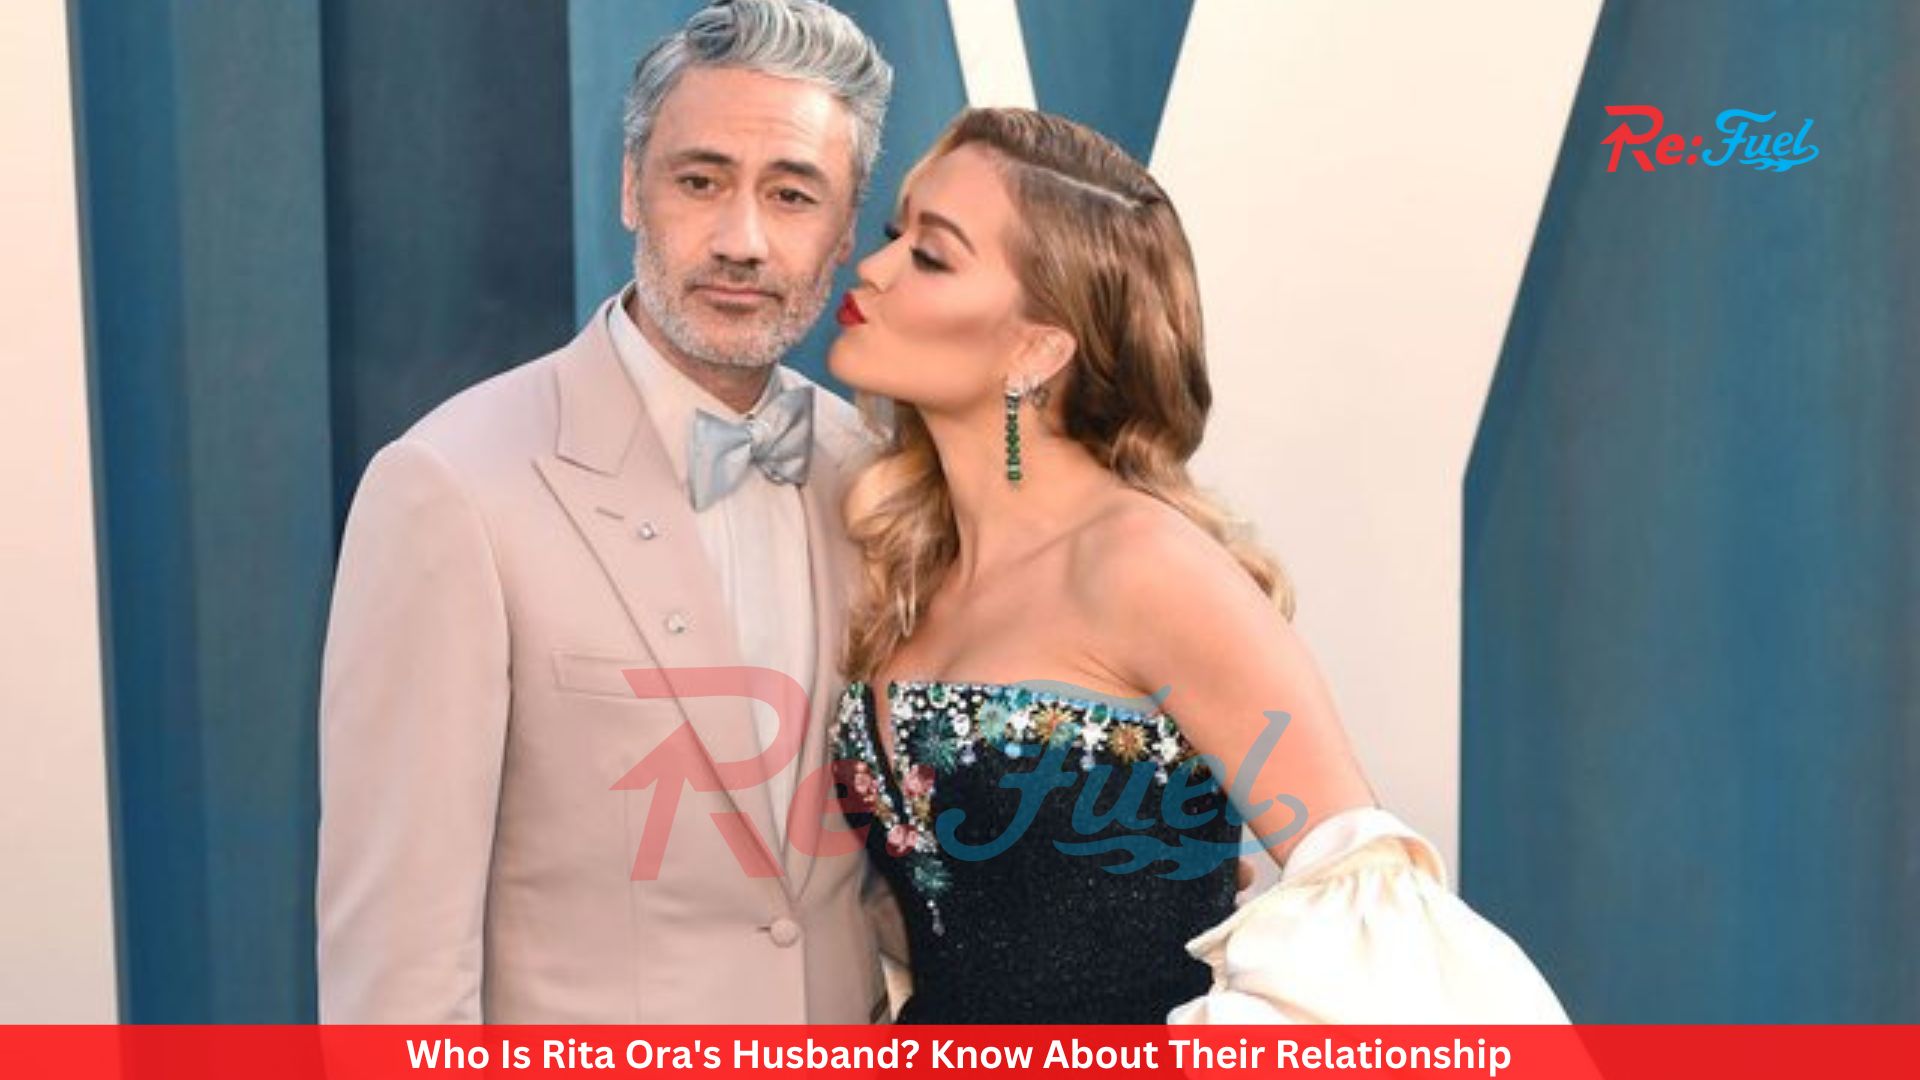 Who Is Rita Ora's Husband? Know About Their Relationship